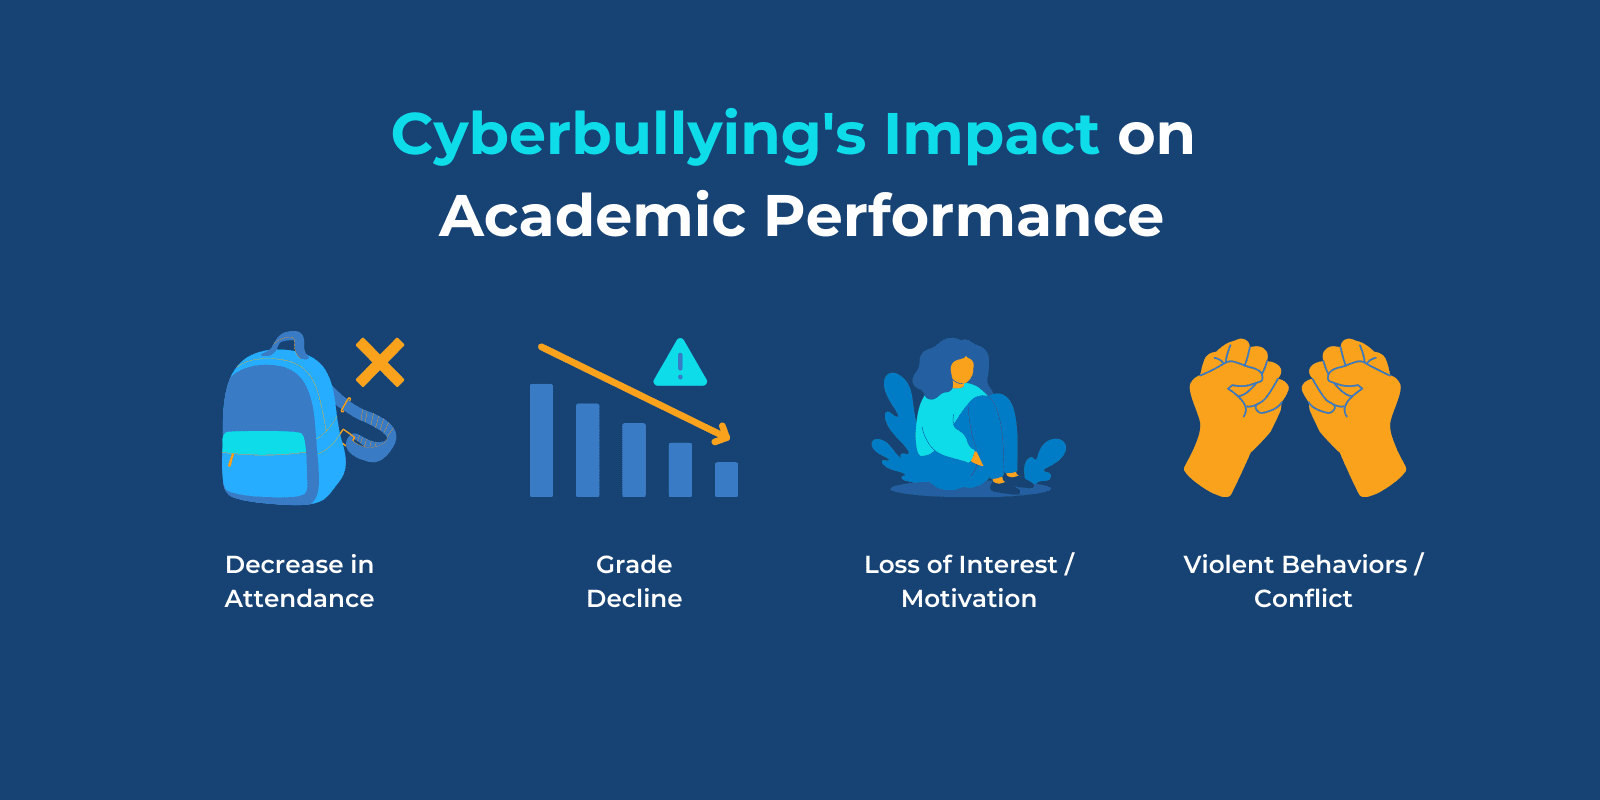 Cyberbullying's impact on academic performance with relevant icons: Decrease in attendance, grade decline, loss of interest/motivation, and violent behaviors/conflict.